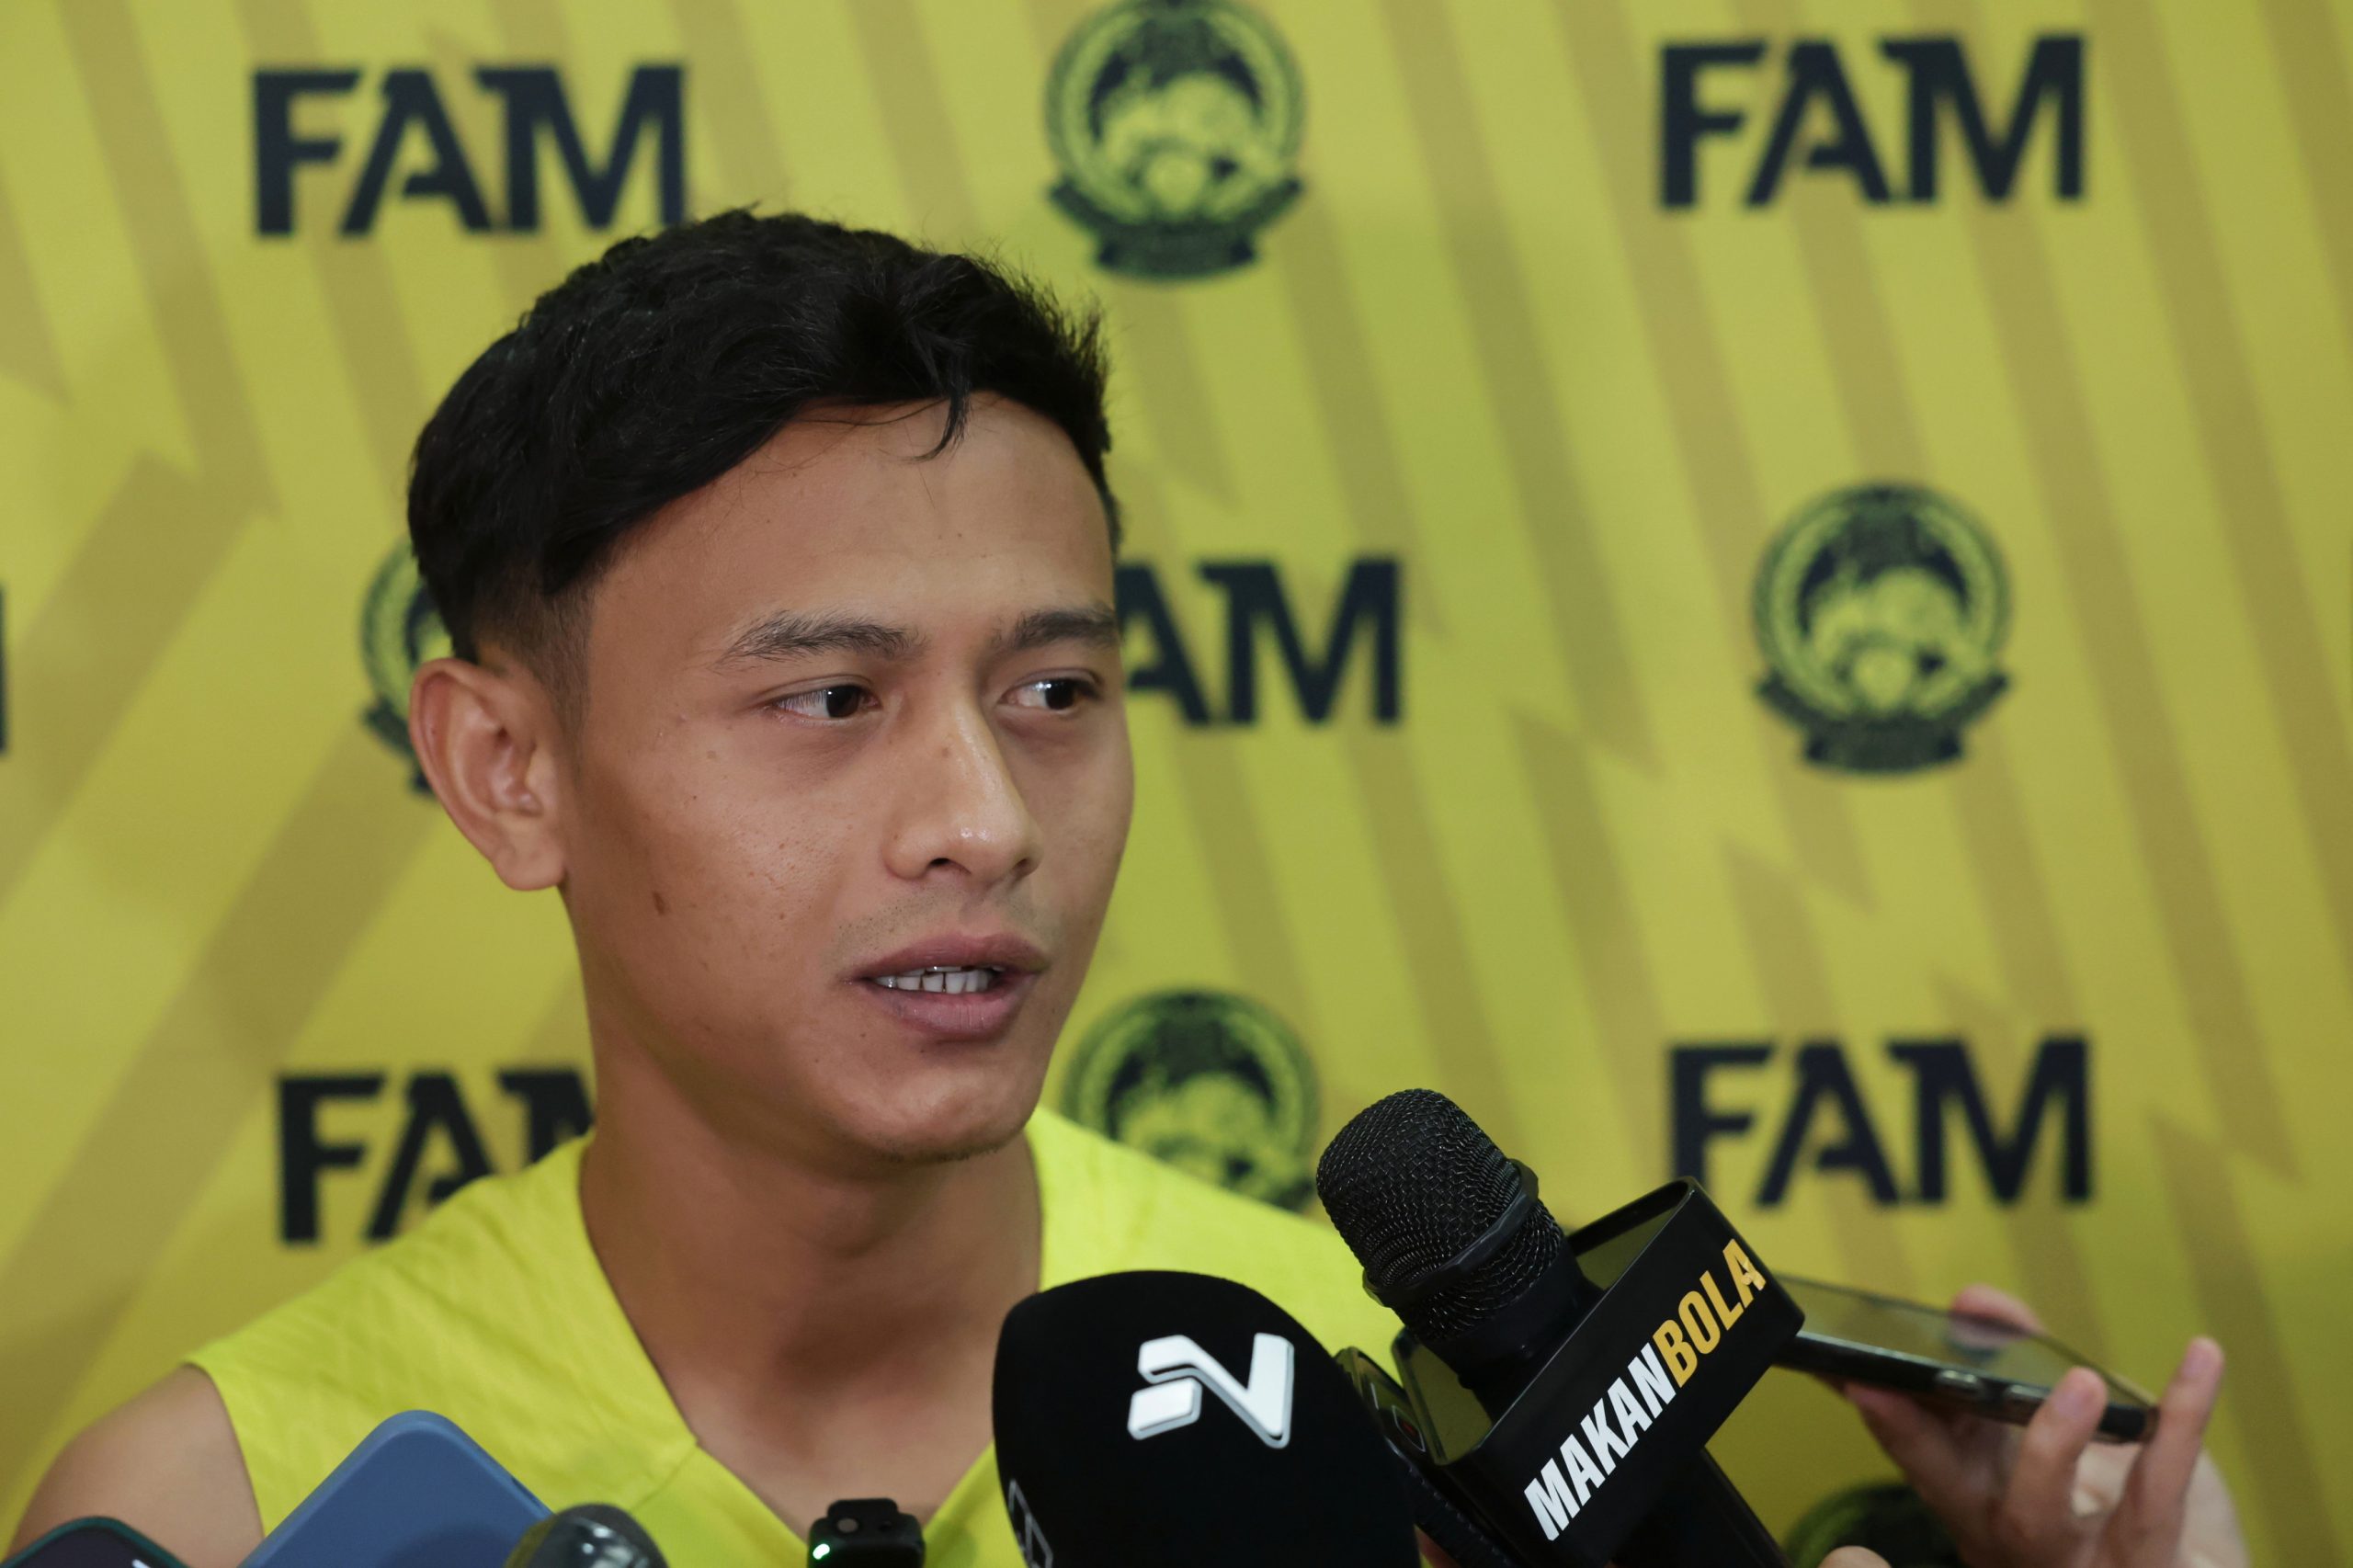 Azam Azih determined to play his best despite past injuries